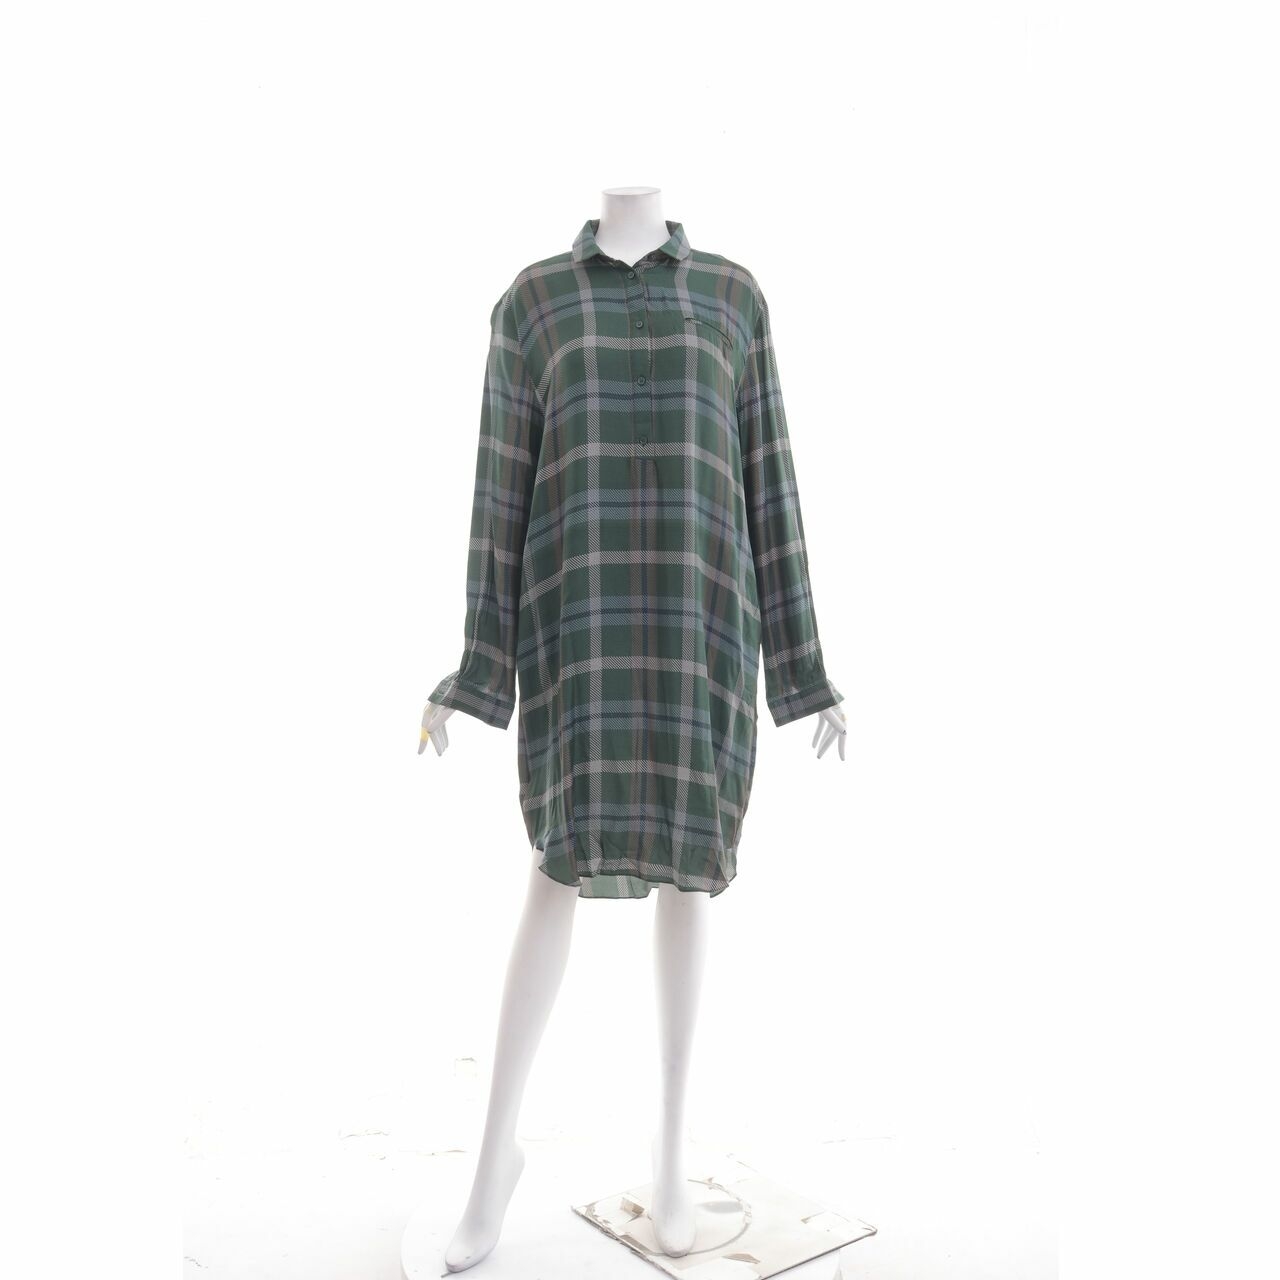 & Other Stories Multi Plaid Tunic Blouse